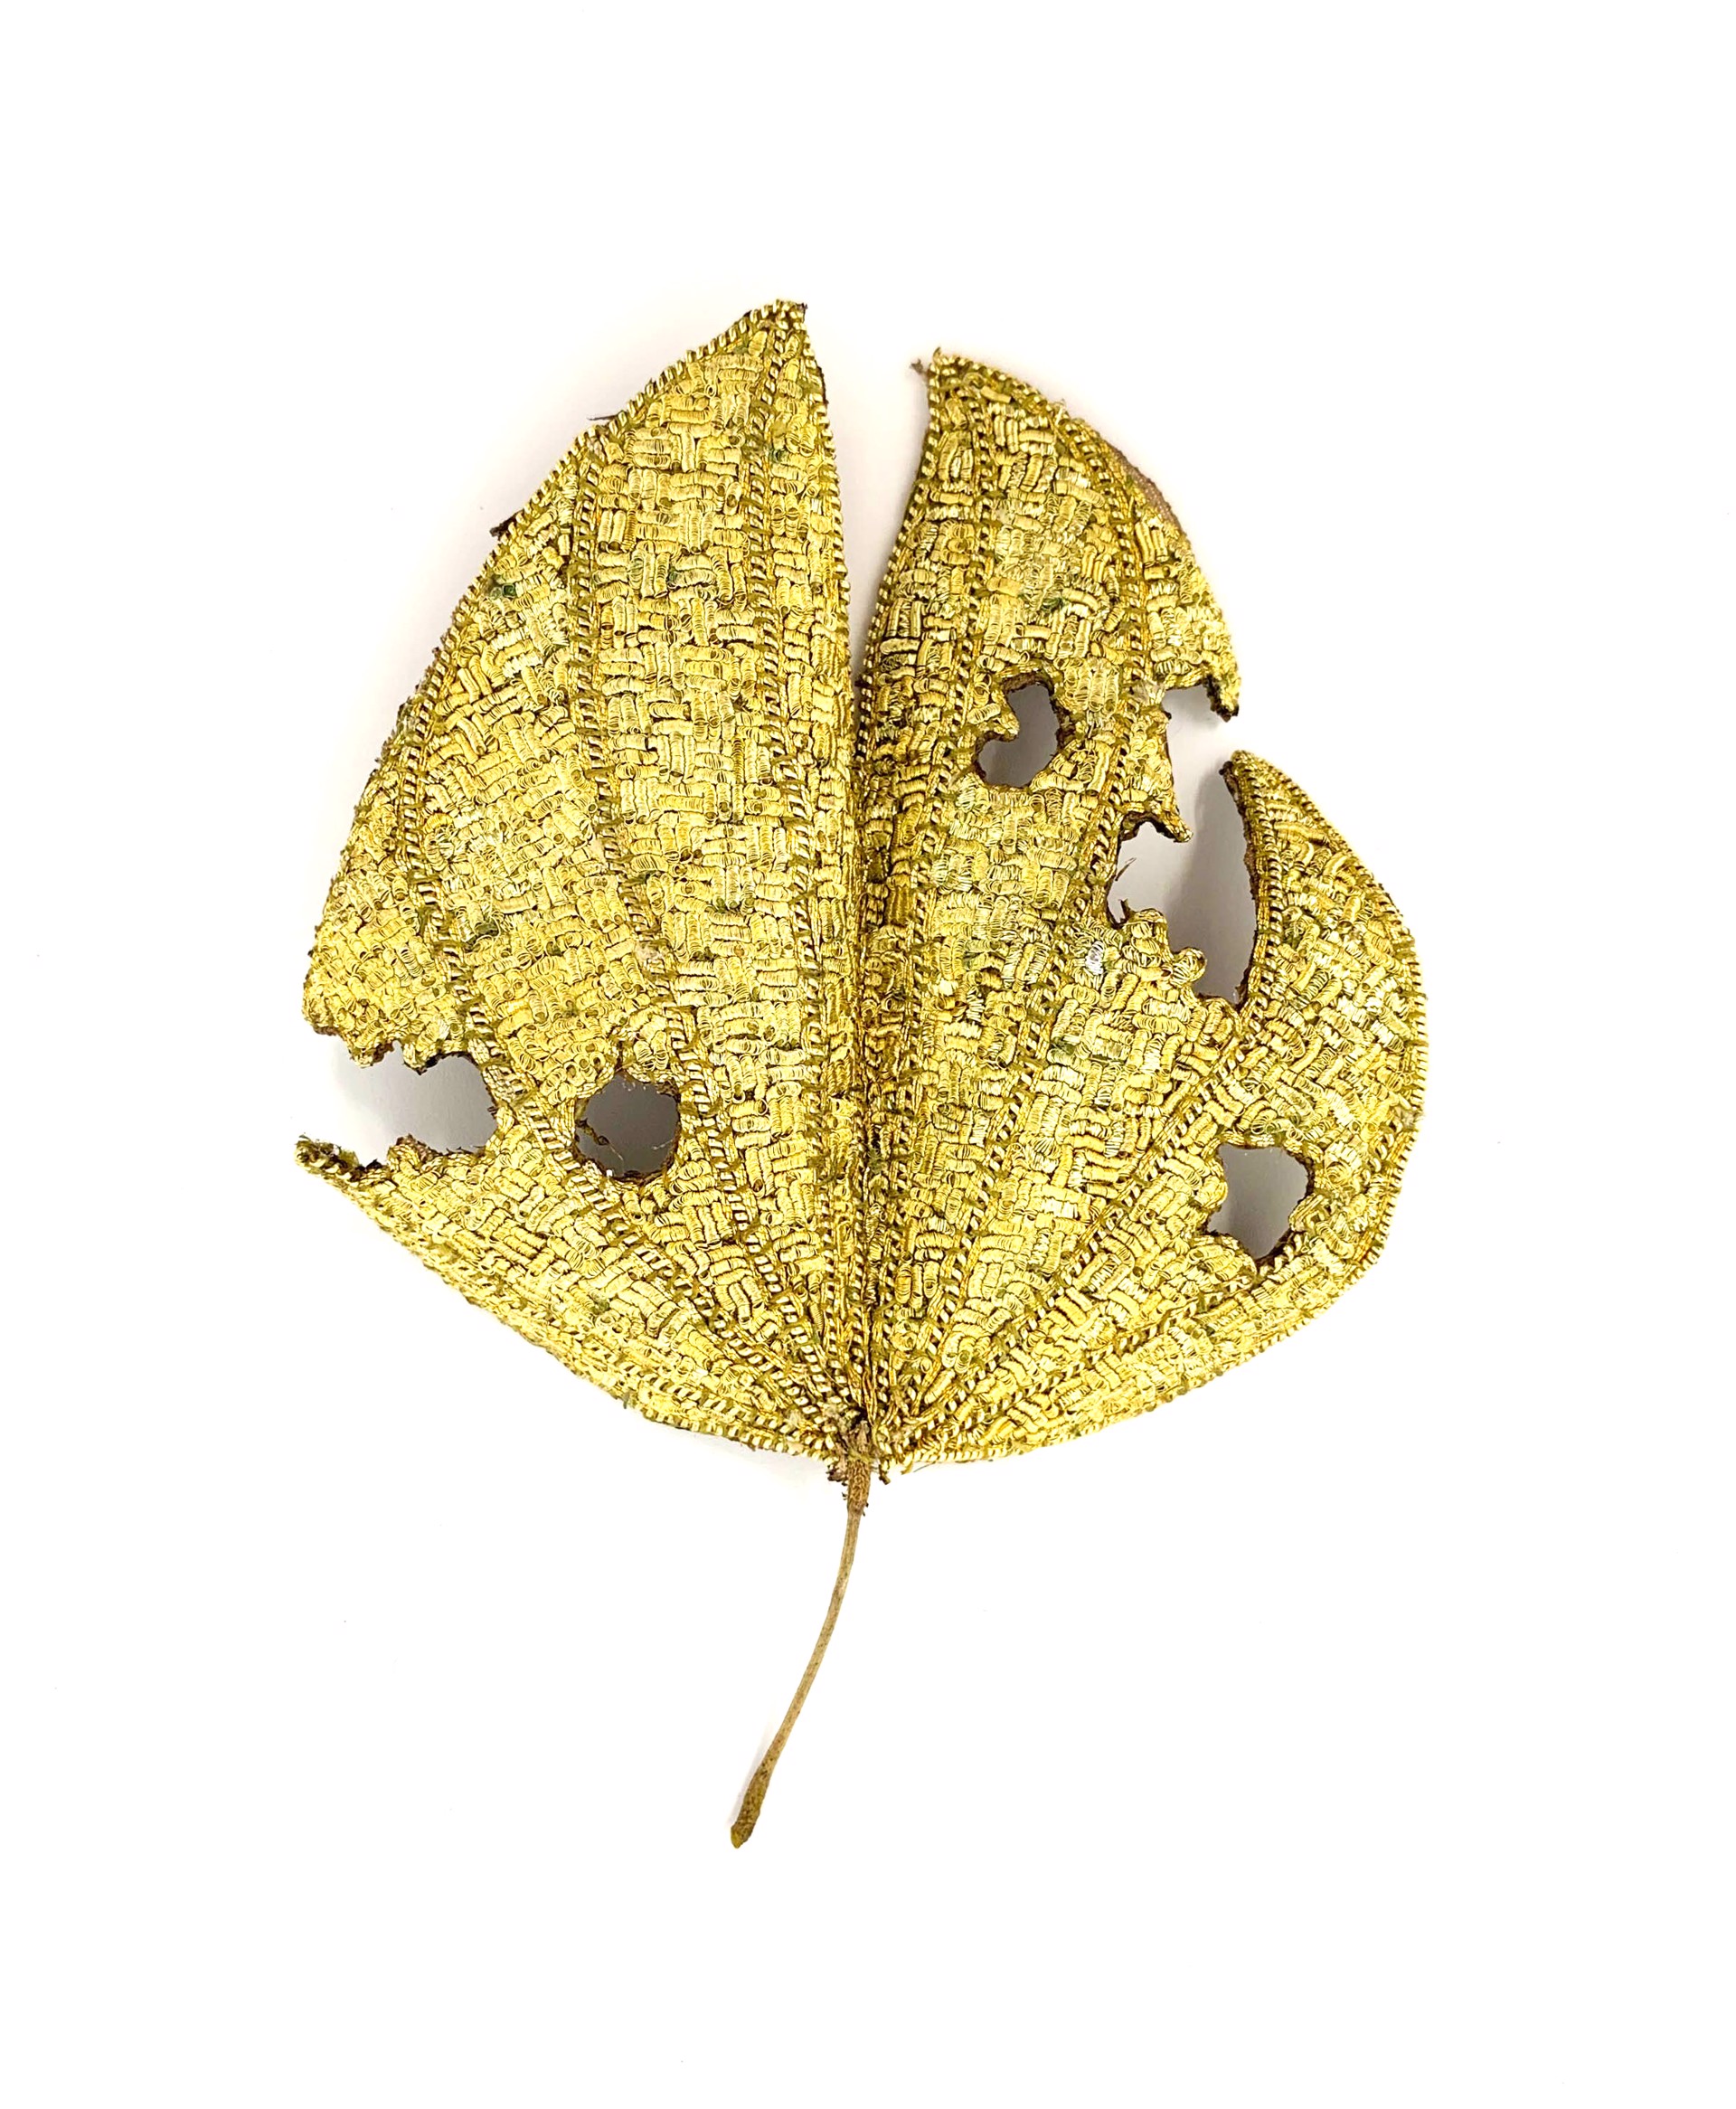 The Impermanence of Life: Bauhinia Leaf IX by Tiao Nithakhong Somsanith